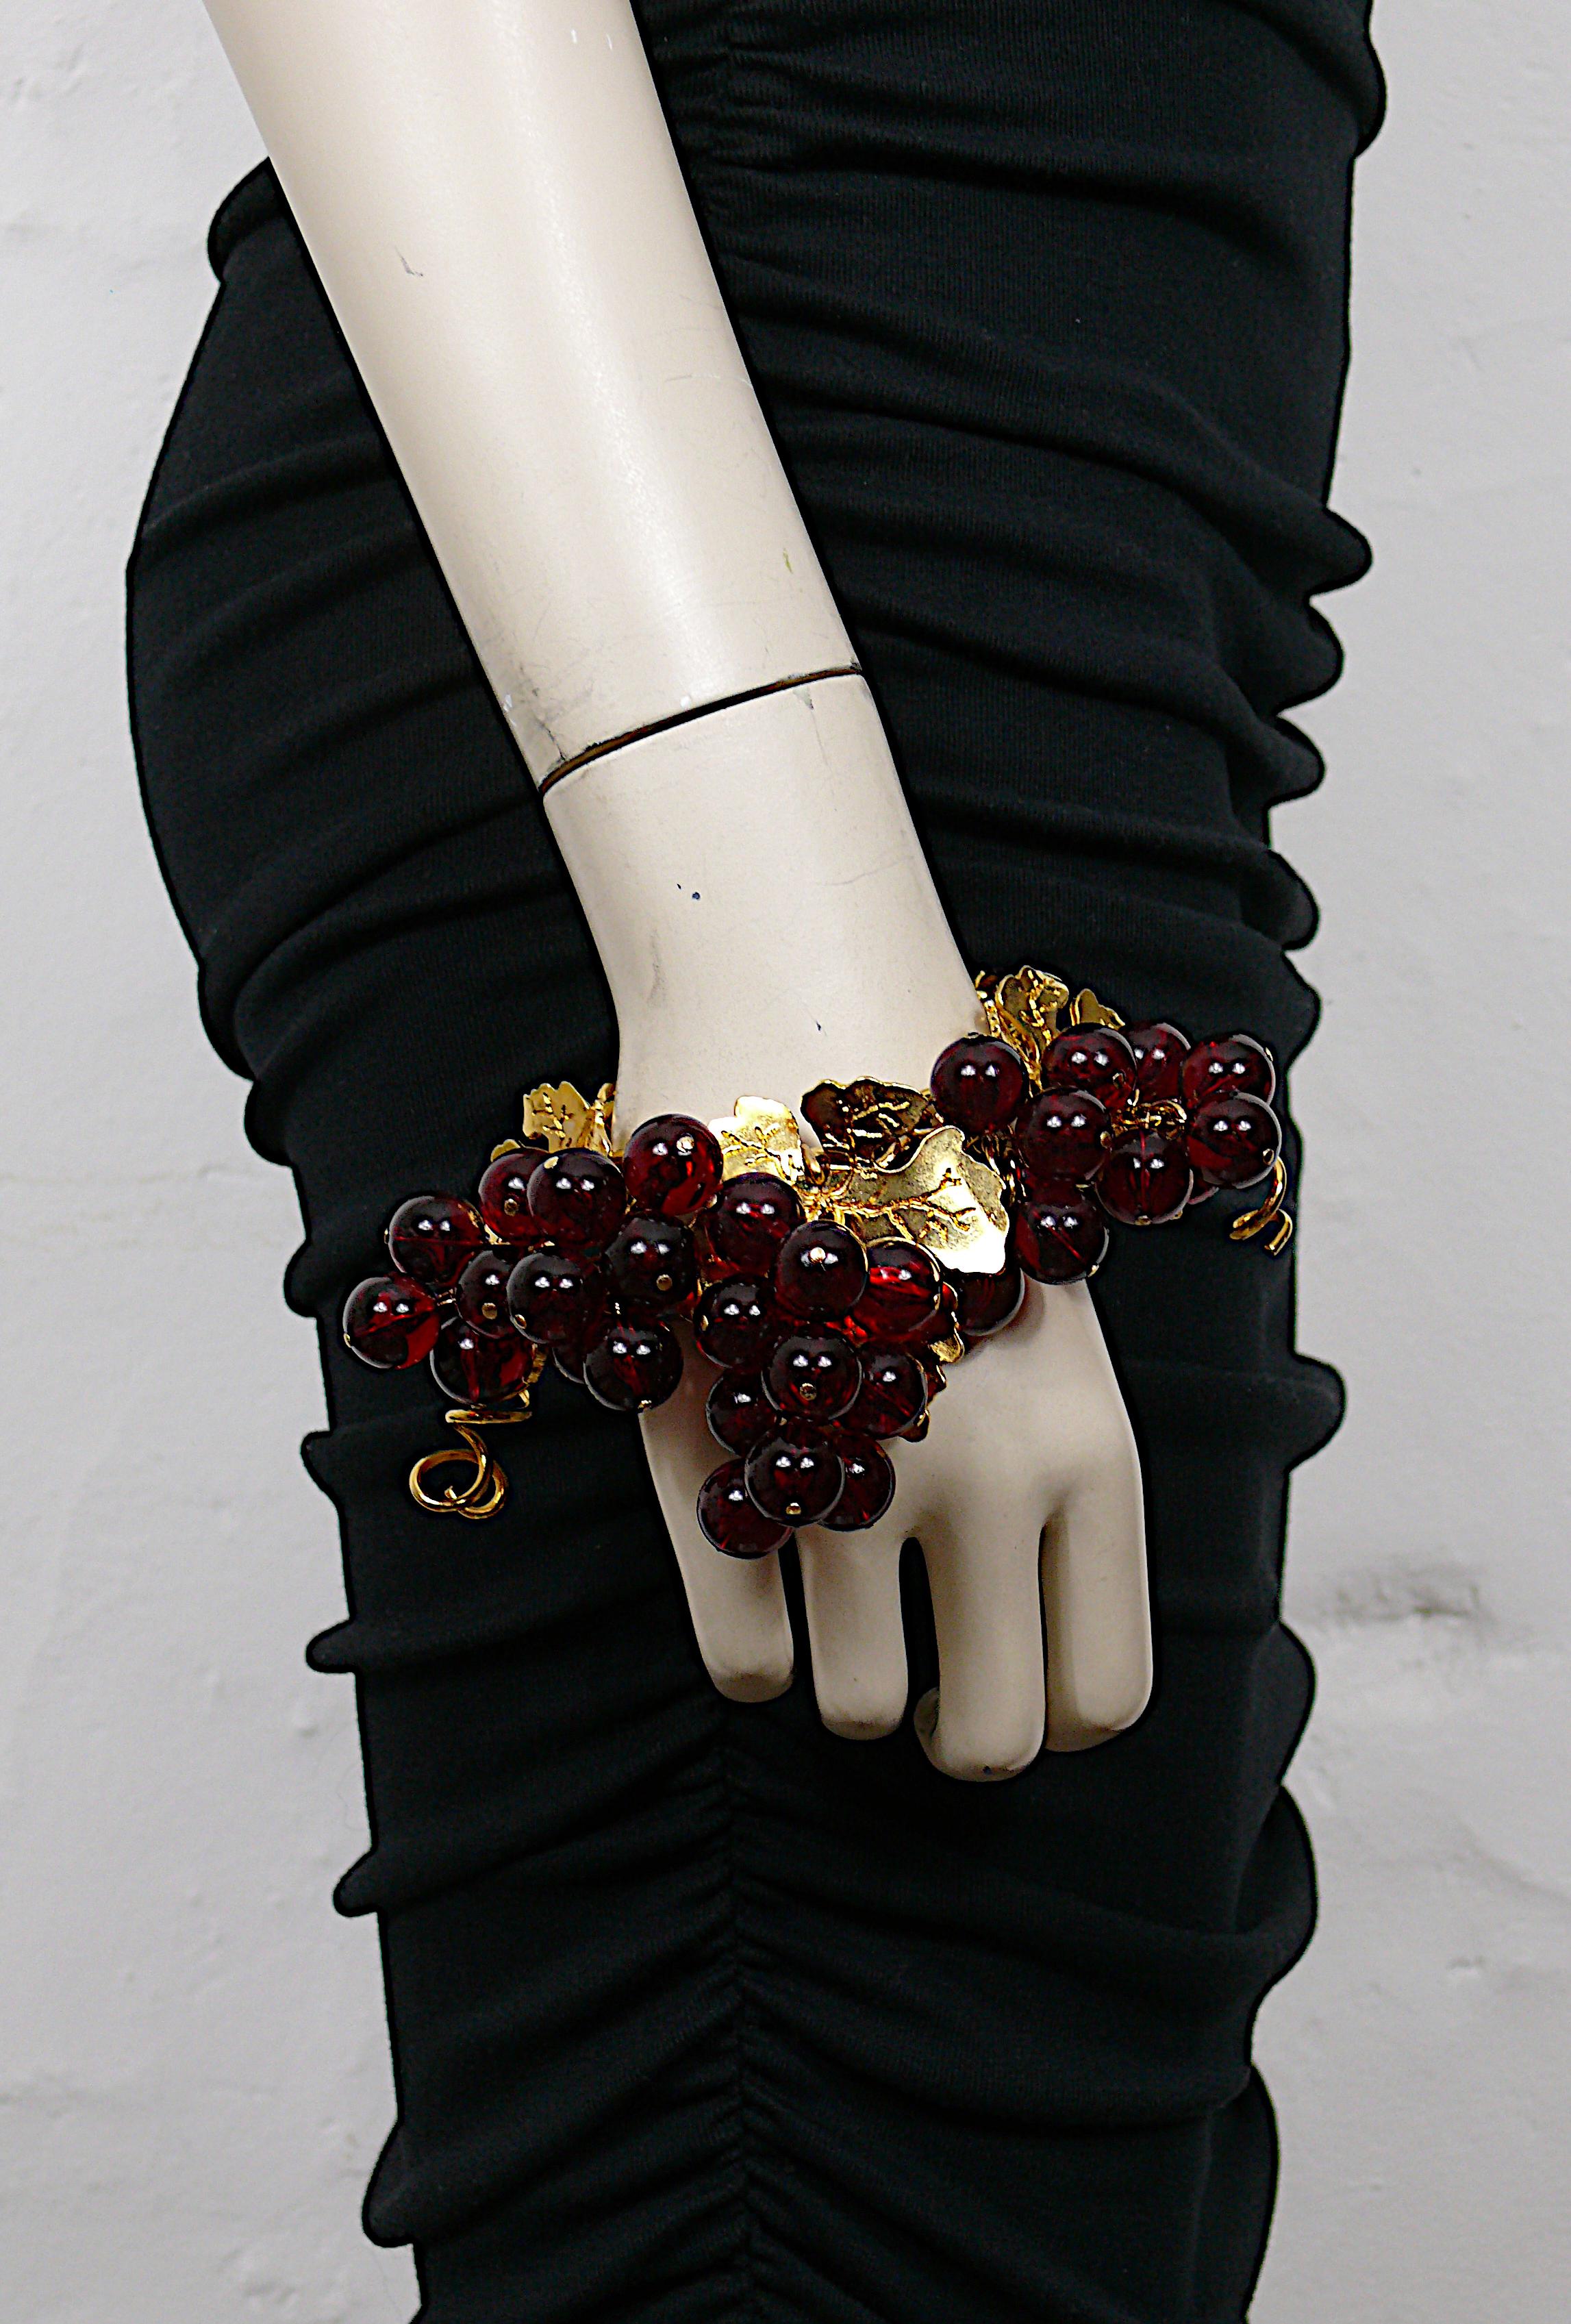 KRIZIA vintage gold tone link bracelet featuring gold tone leaves and gorgeous bunches of grapes in red resin.

Lobster clasp closure.

Embossed KRIZIA Made in Italy.

Indicative measurements : length approx. 21 cm (8.27 inches).

Material : Gold